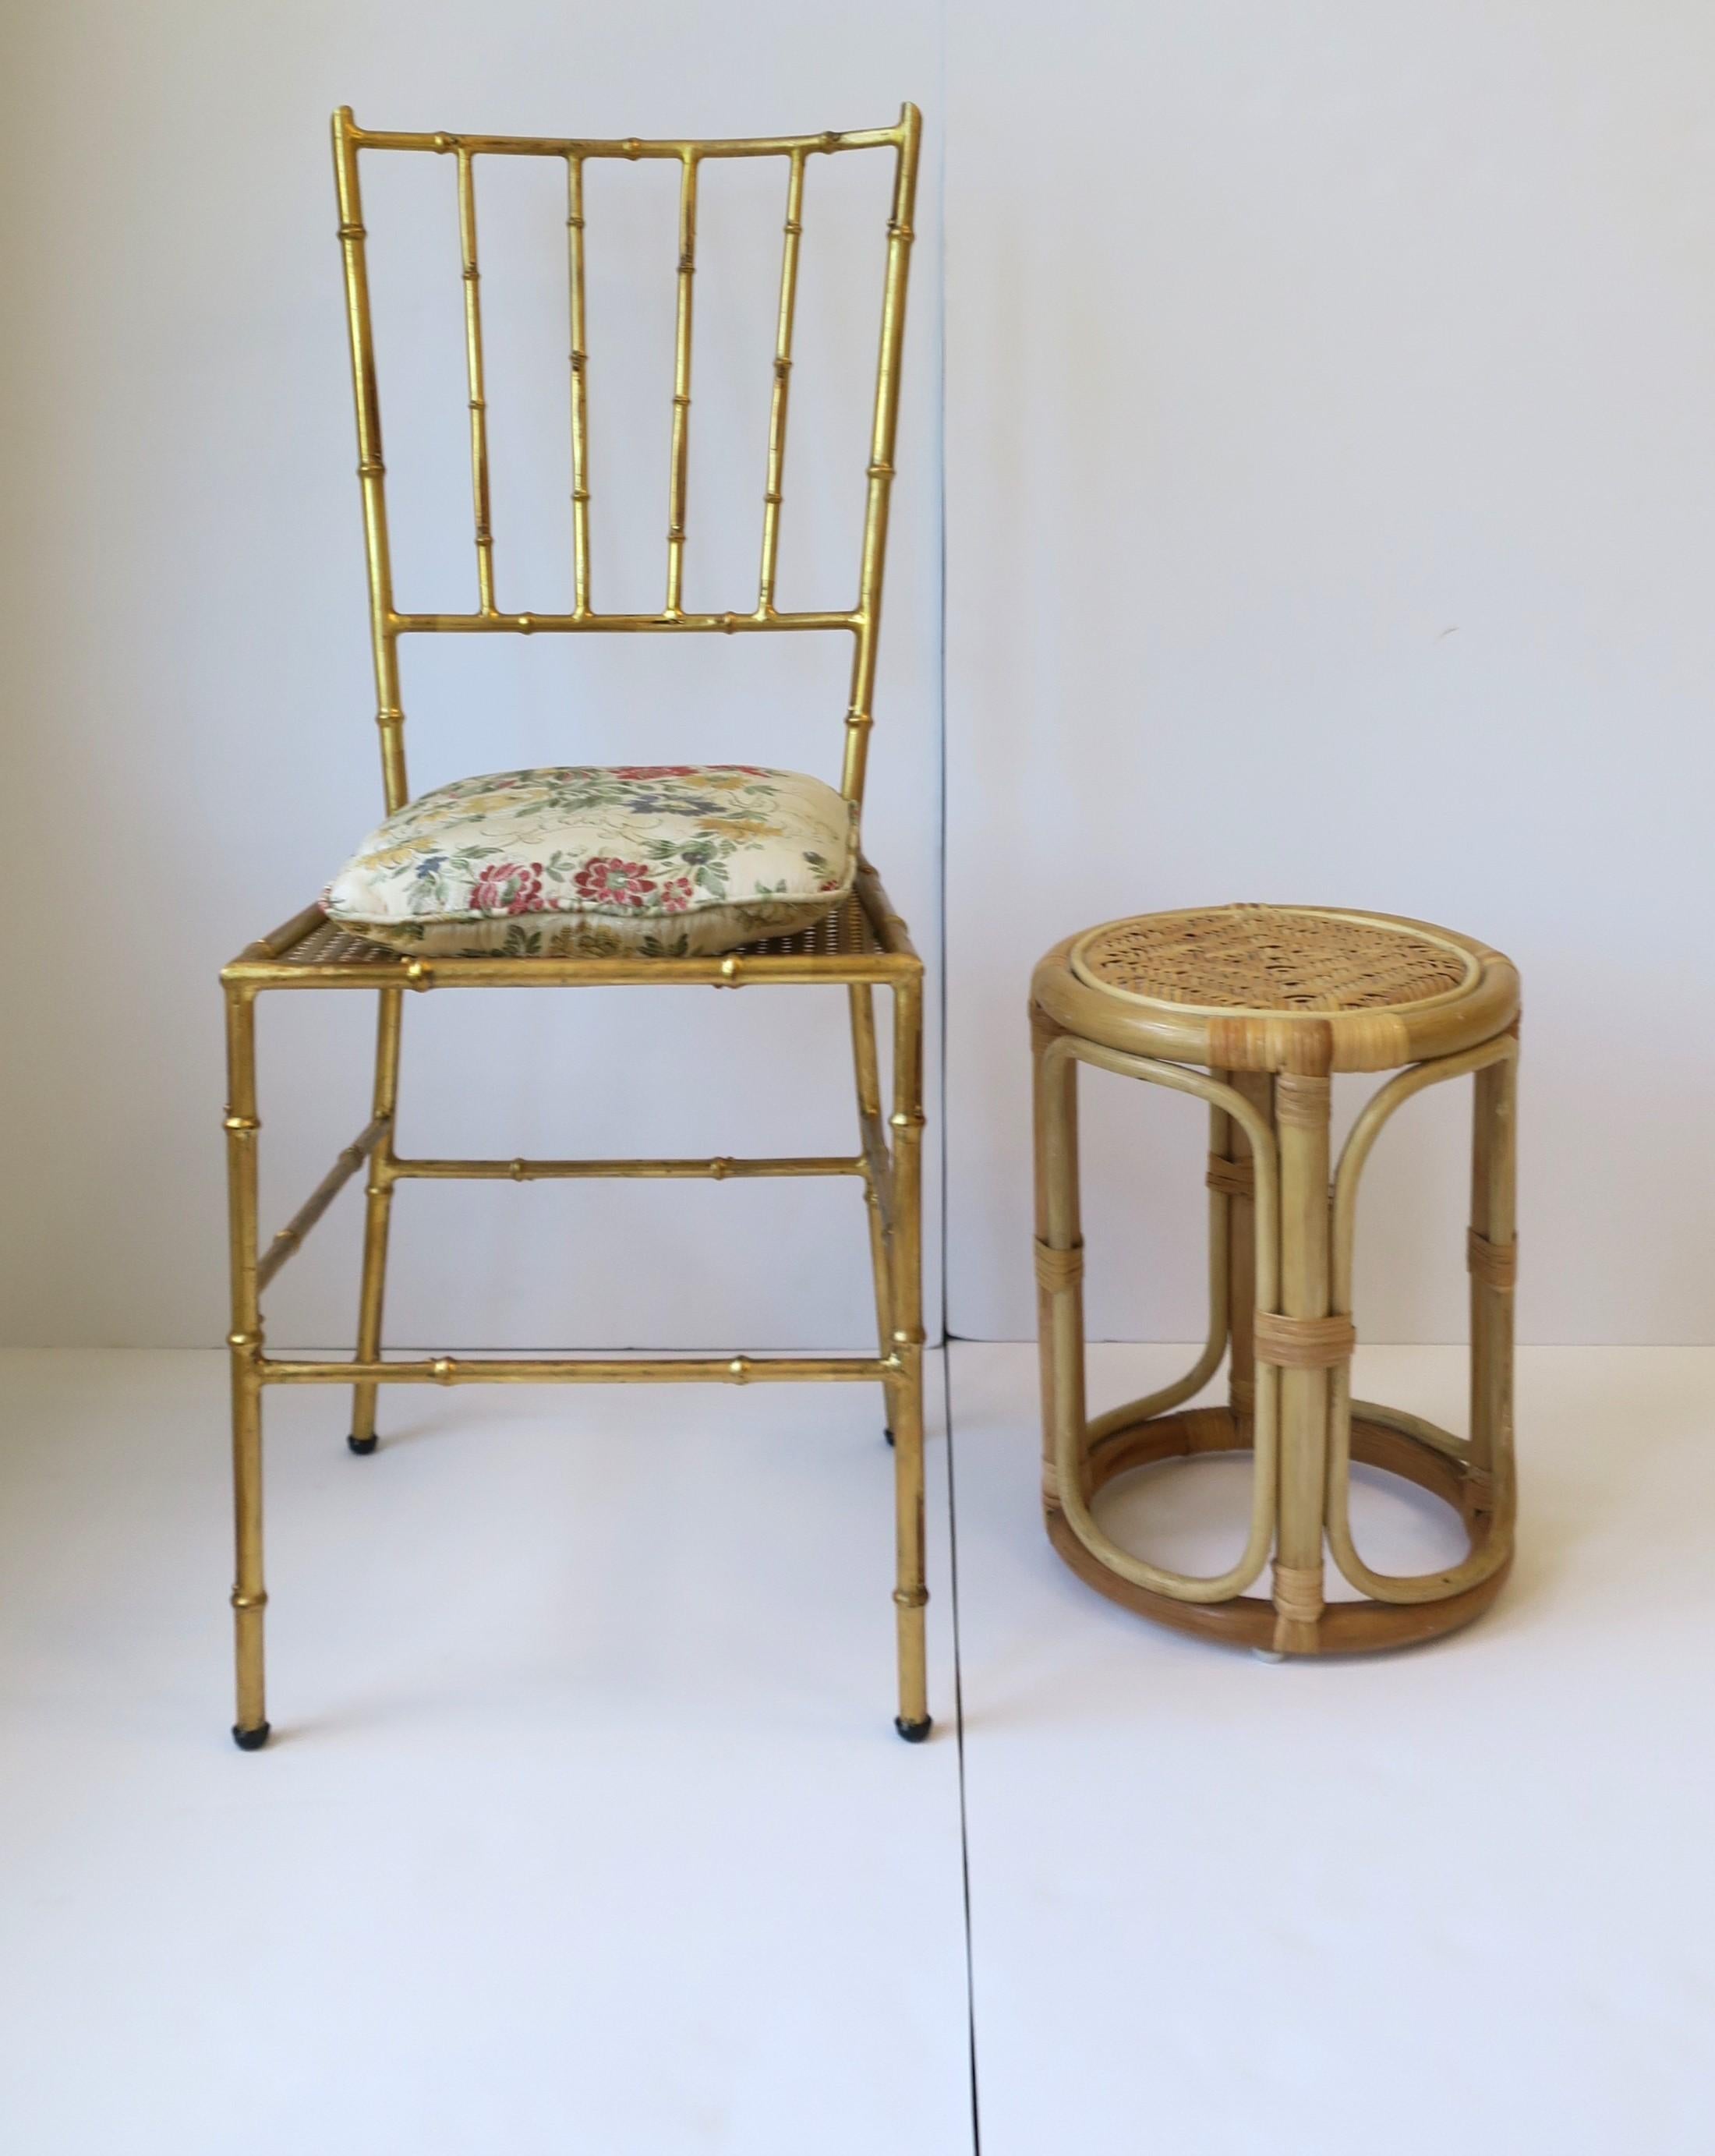 Italian Gold Metal Cane and Bamboo-Esque Desk, Dining or Side Chair For Sale 3